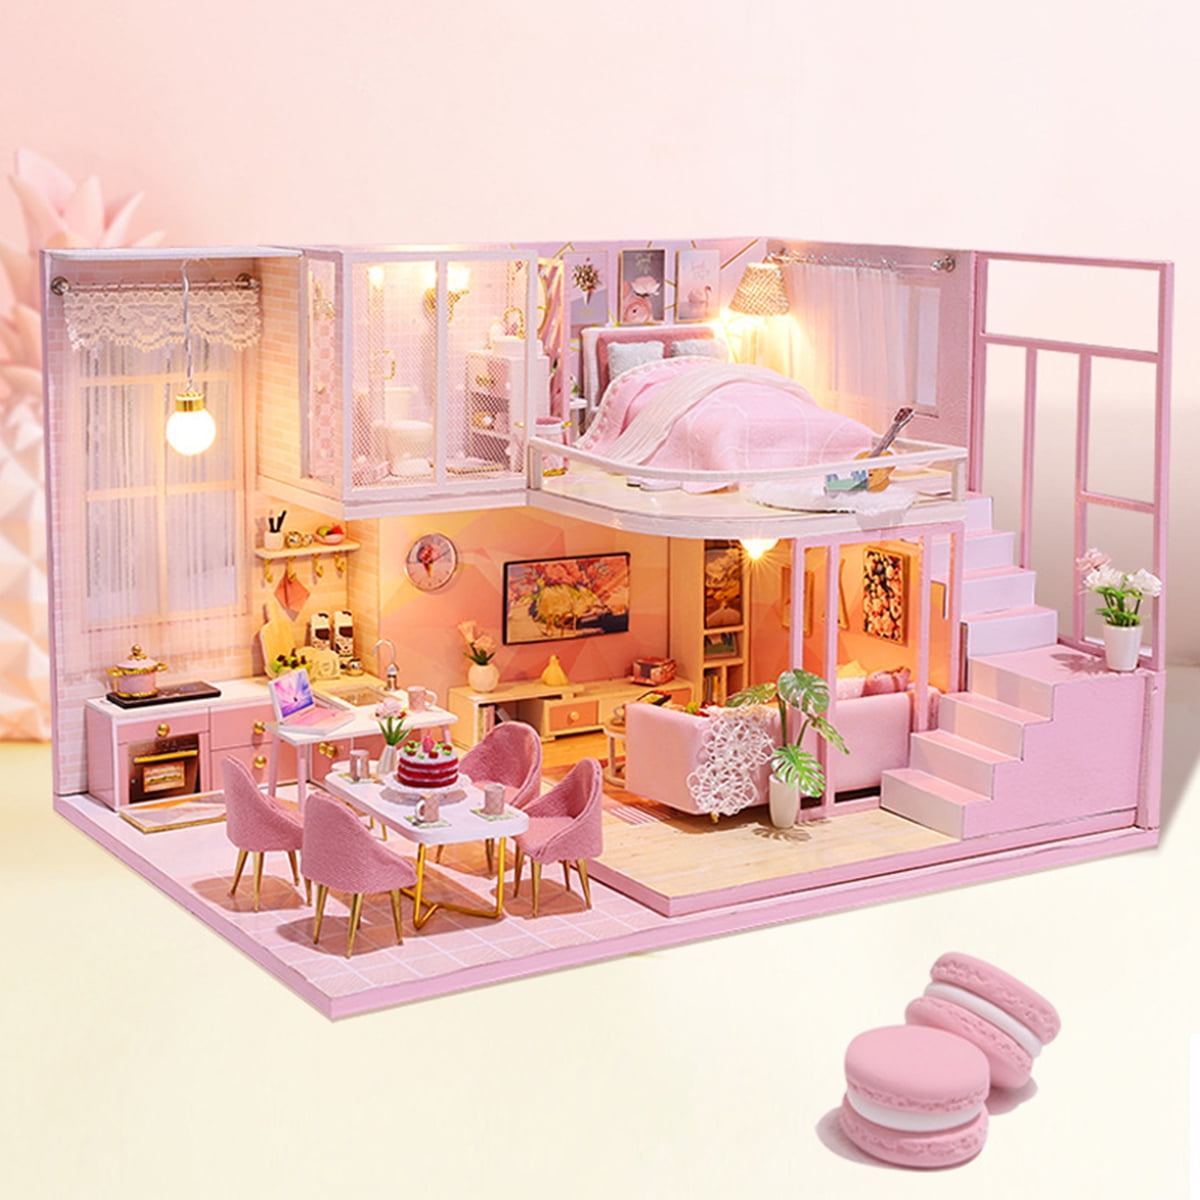 Details about   3D DIY Dollhouse Miniature Furniture Kit Wood LED Light Doll House Toy Kid Gift 